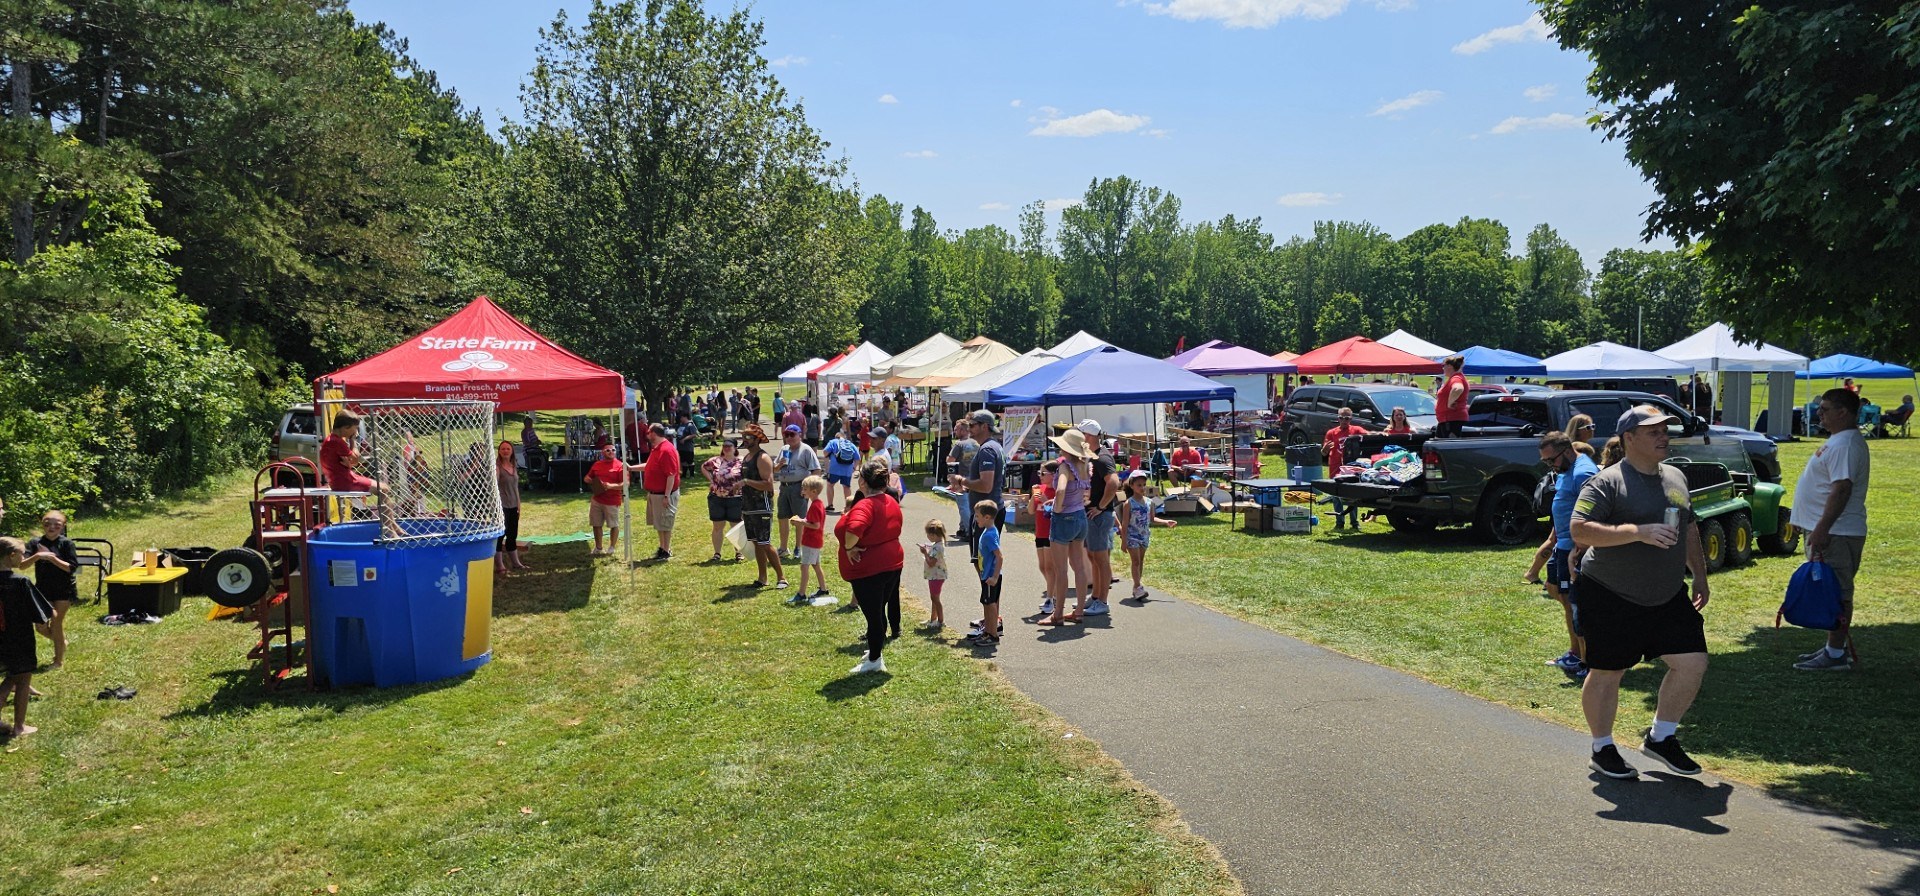 McKean Community Day Brings Fun to Downtown